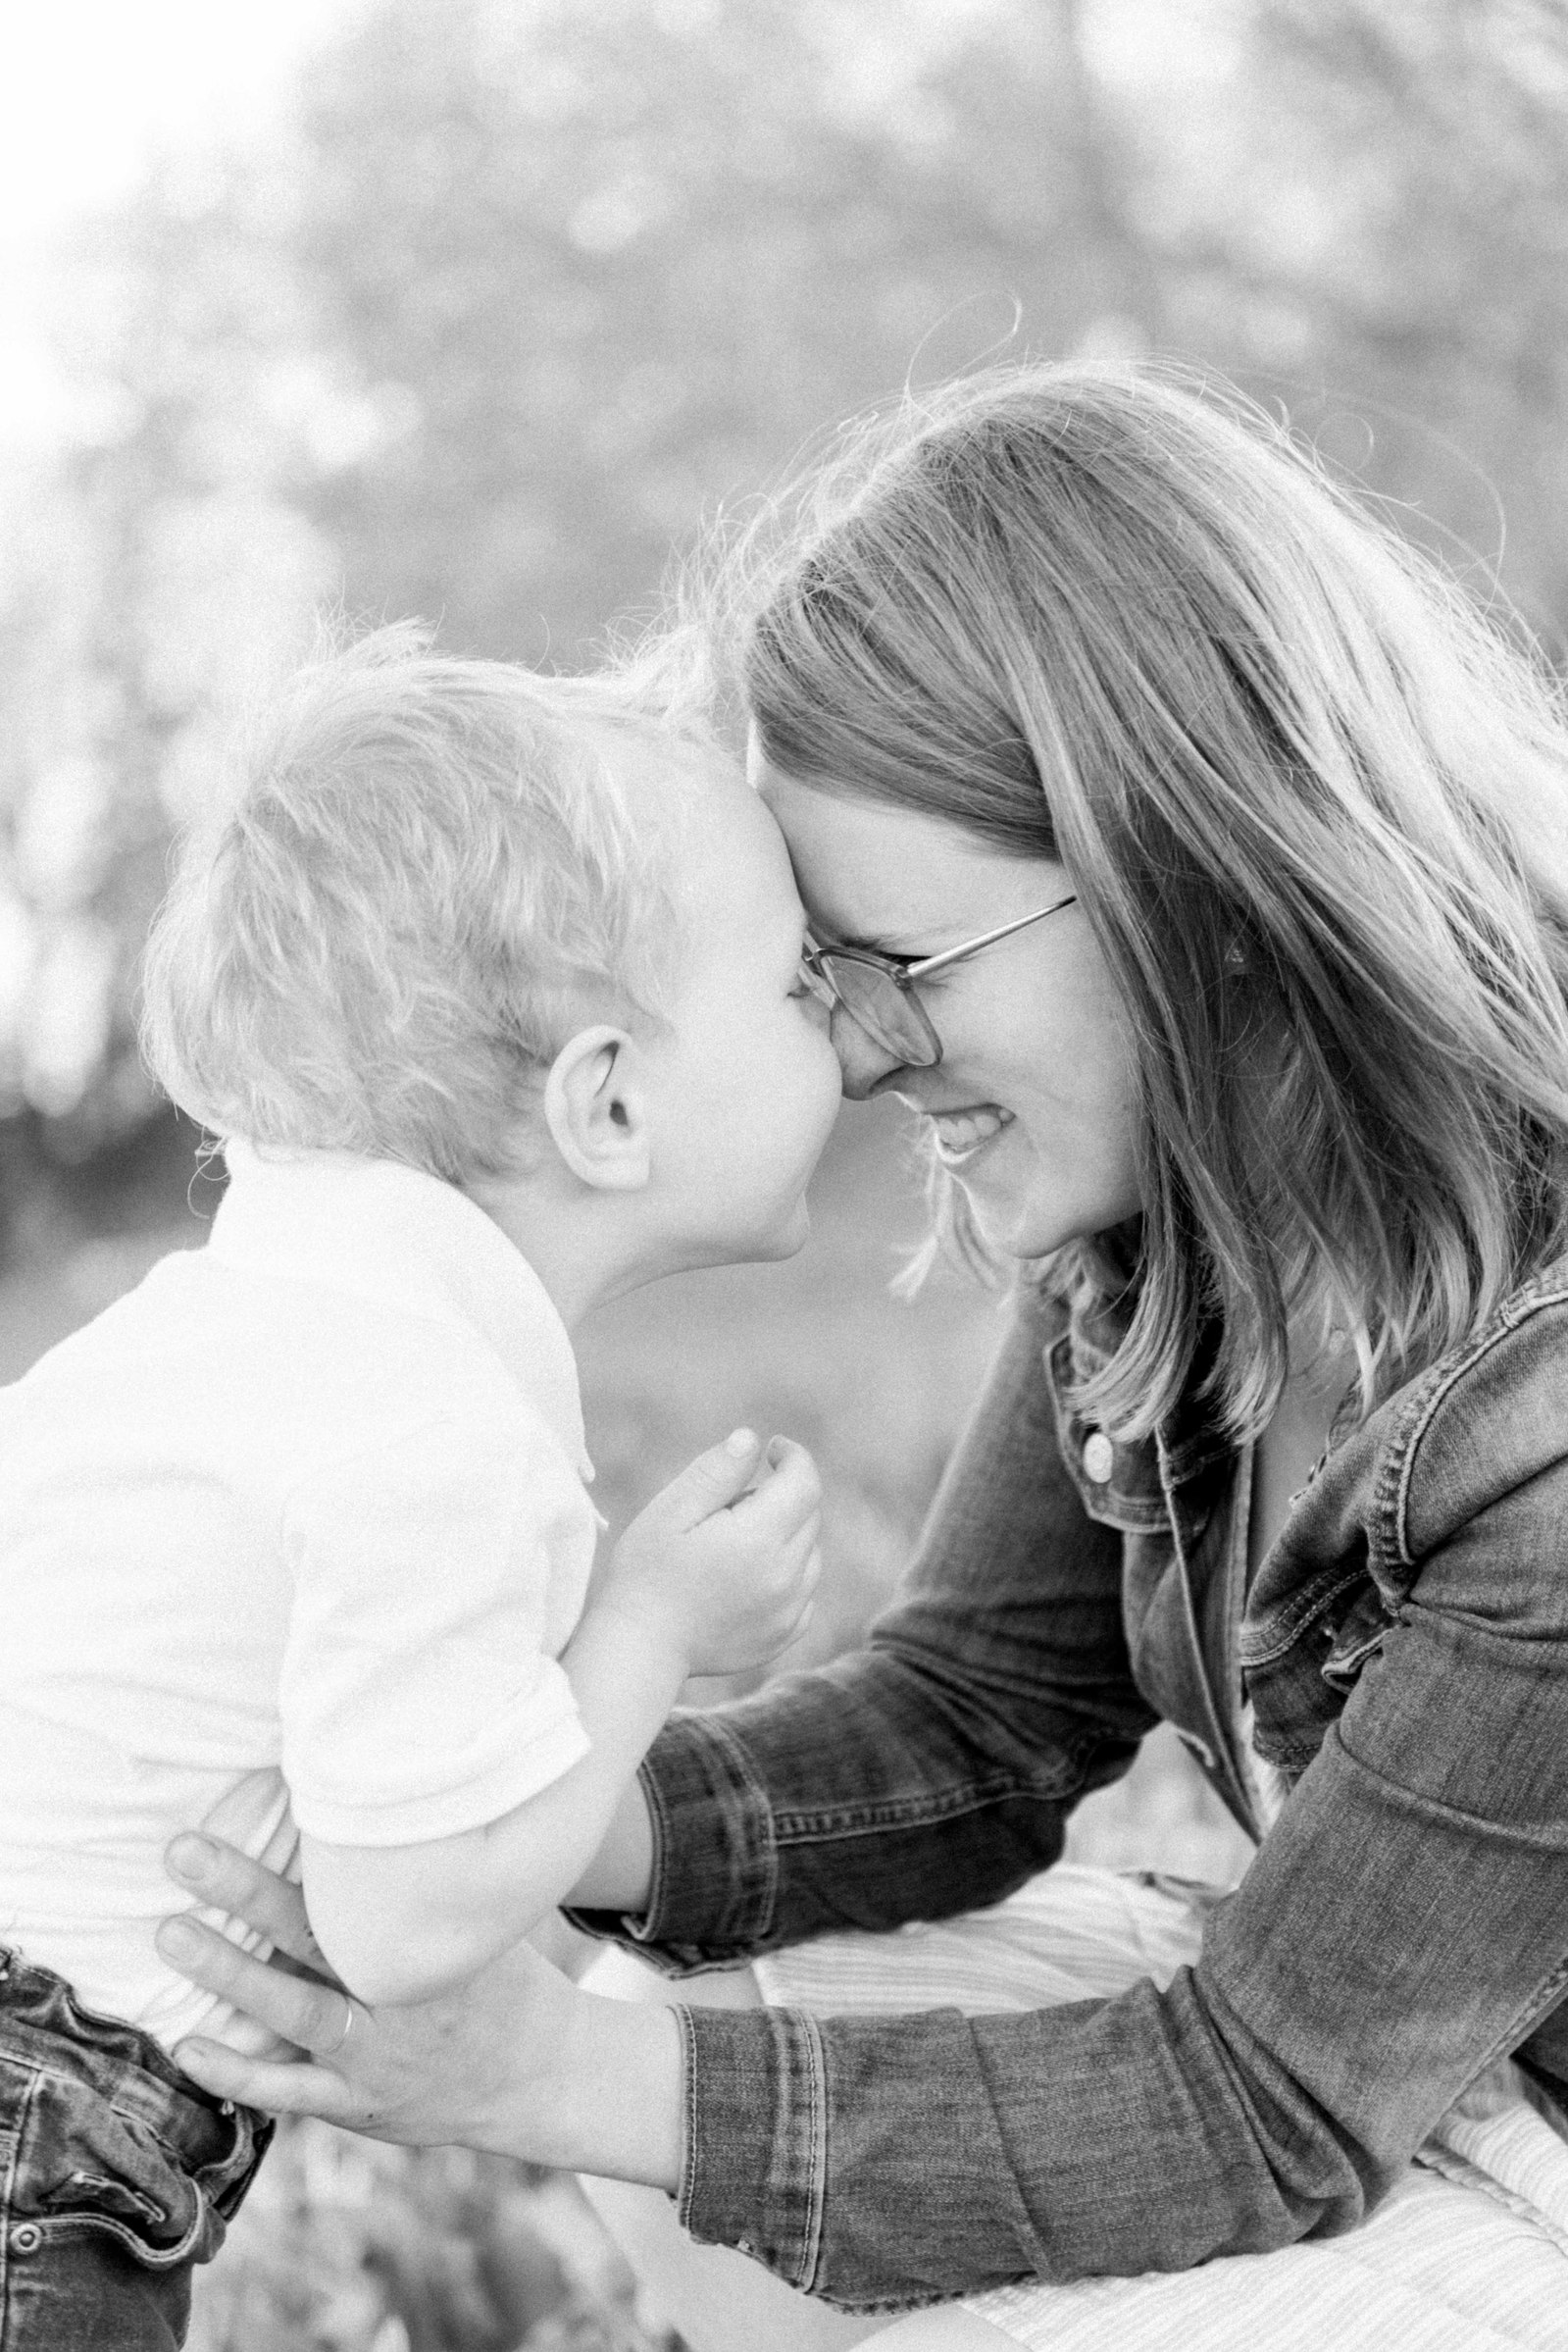 Black and white portrait of a mother and son touching noses. Vankleek Hill Portrait Photographer, L'Orignal, Champlain, Prescott-Russell, Family Photography, Candid Photography, Natural Photographer, Emily VanderBeek Photography.